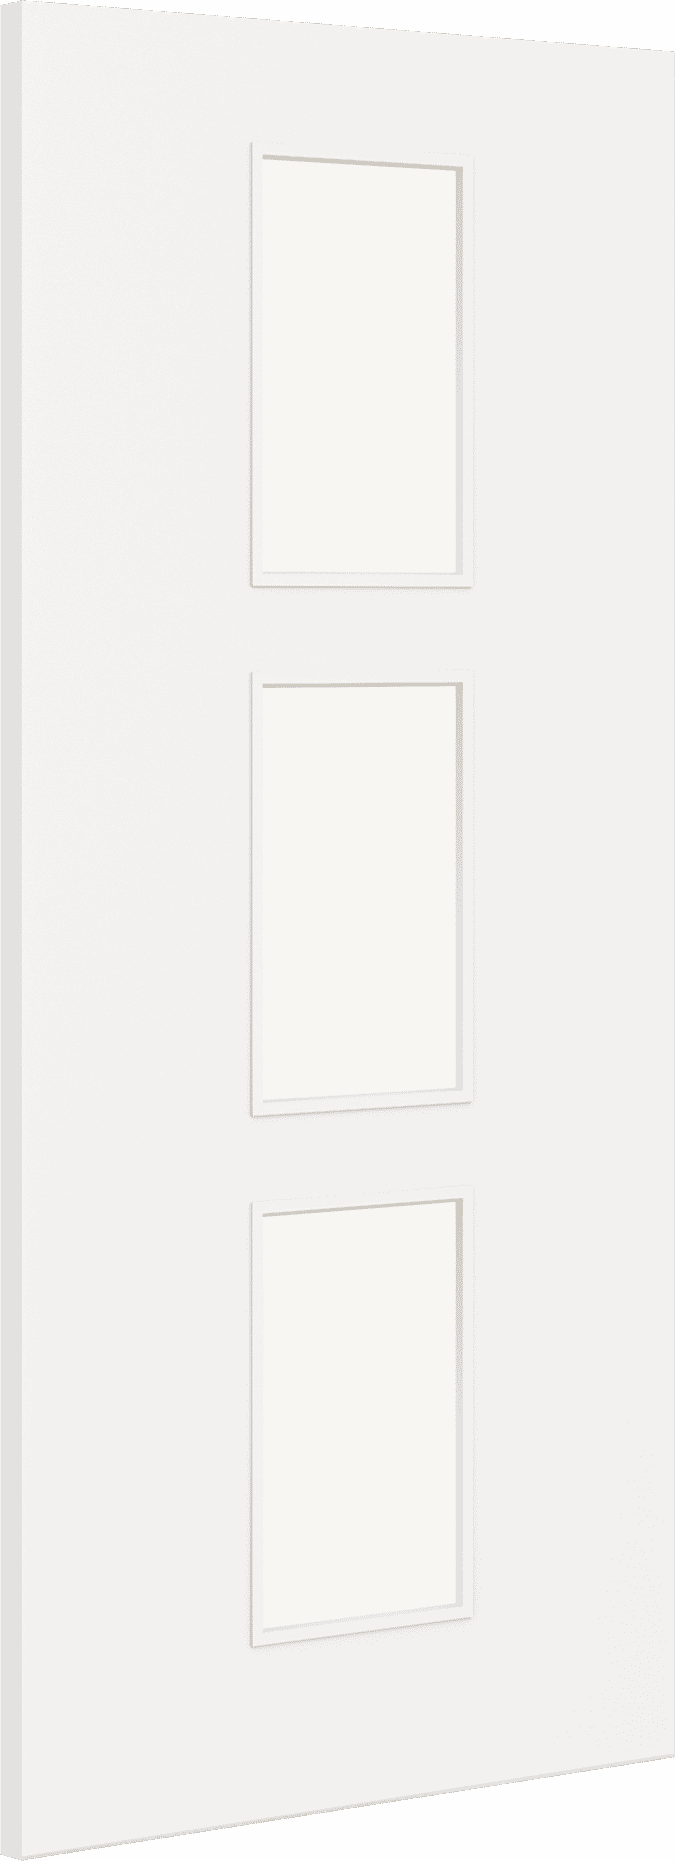 1981mm x 686mm x 44mm (27") Architectural Paint Grade White 11 Frosted Glazed Fire Door Blank